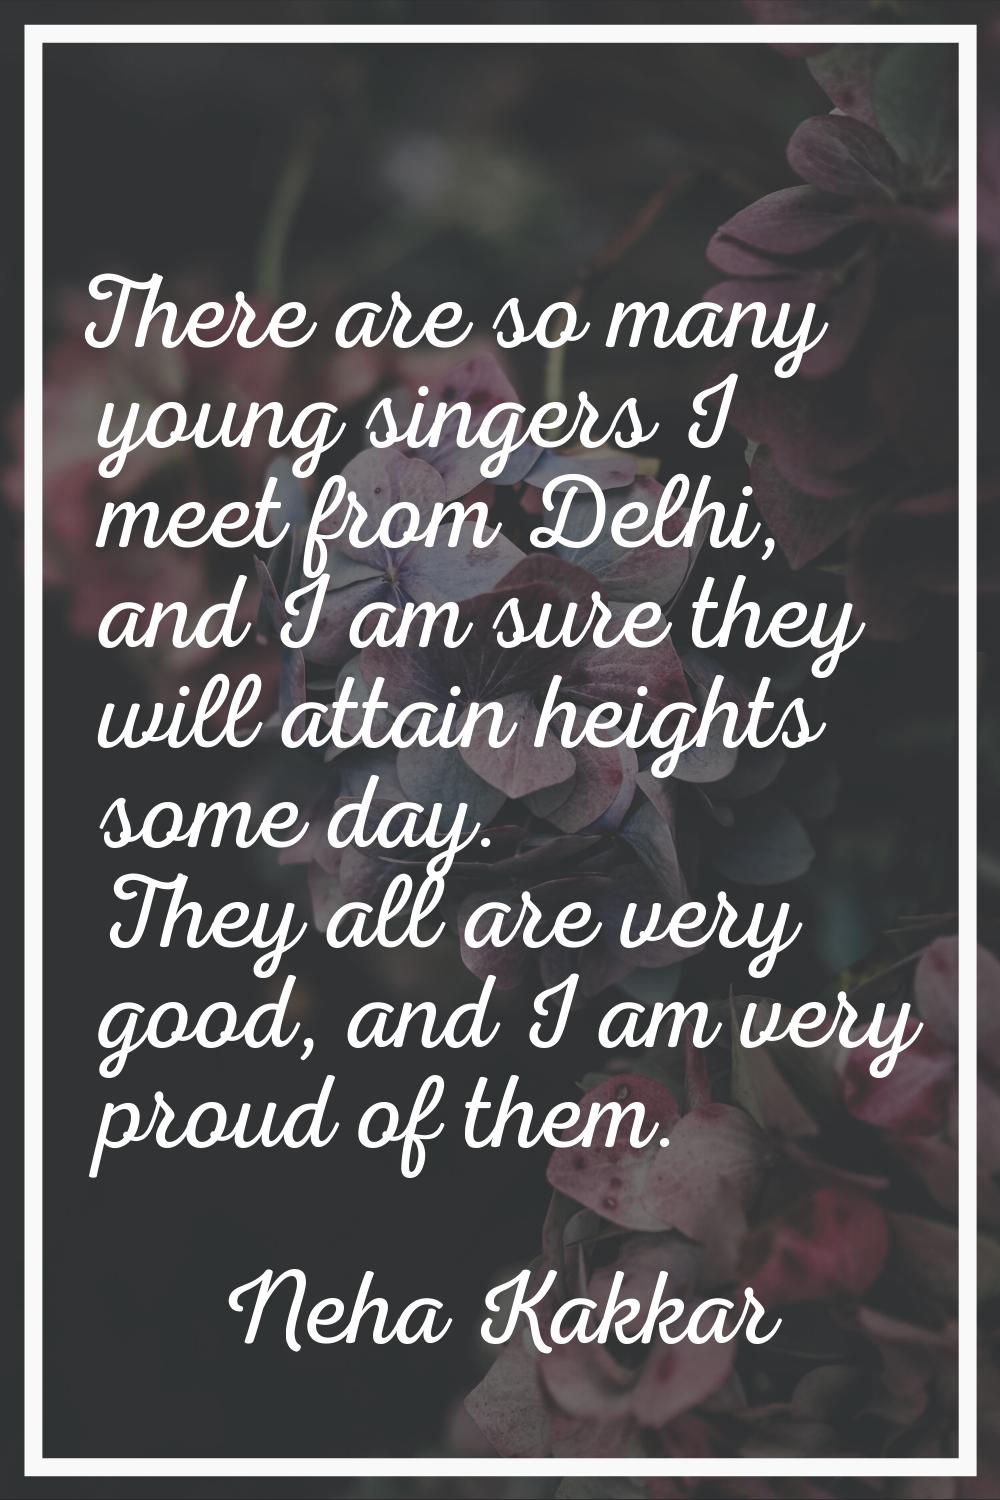 There are so many young singers I meet from Delhi, and I am sure they will attain heights some day.